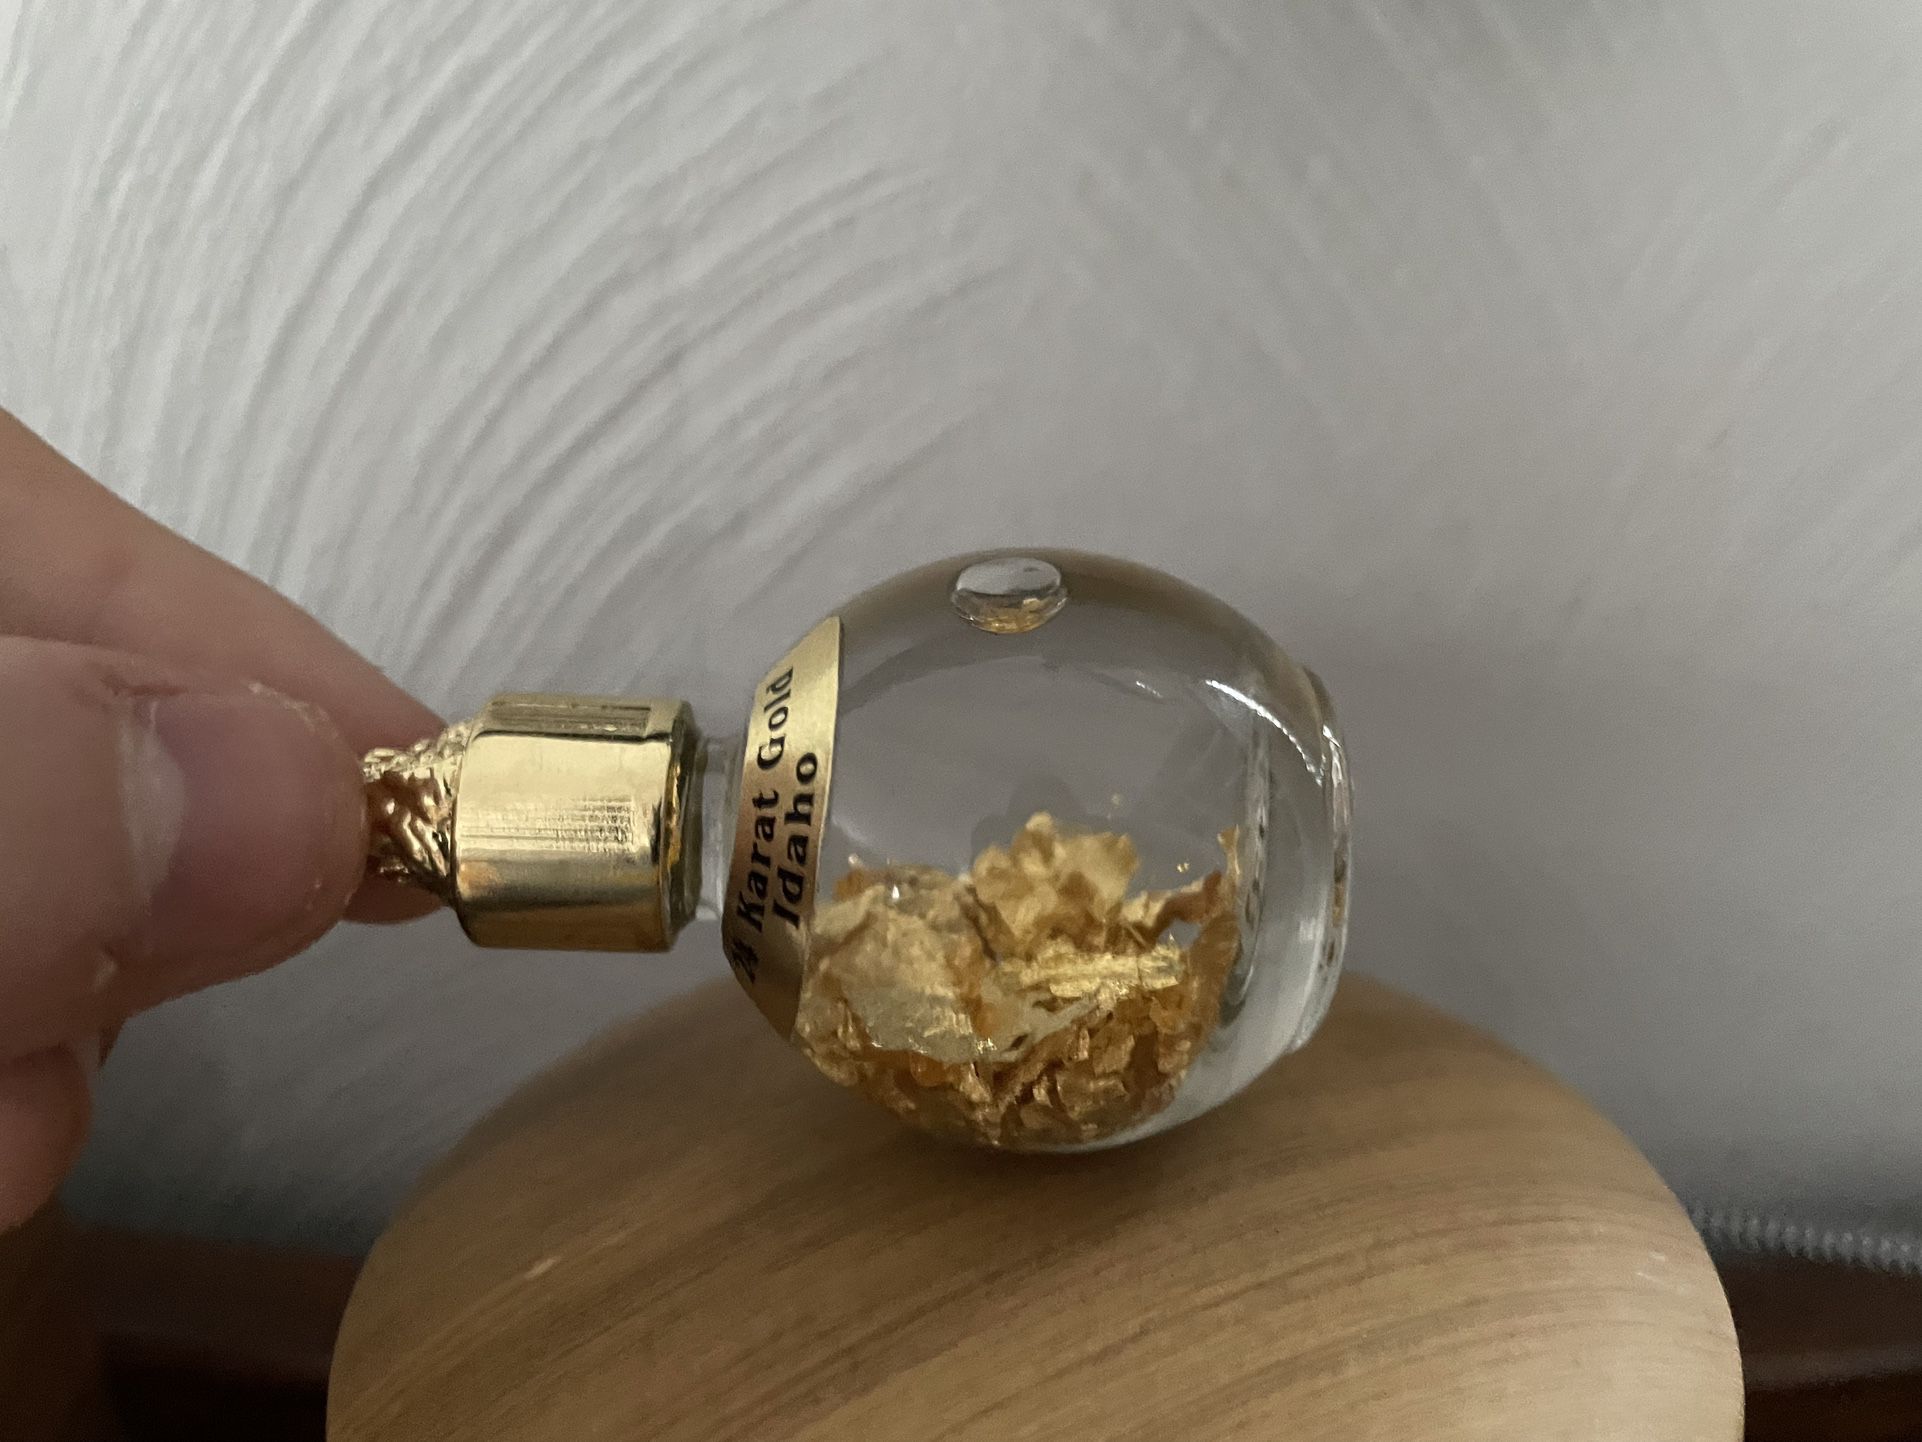 Small Amount Of Gold Flakes In This Glass Thing